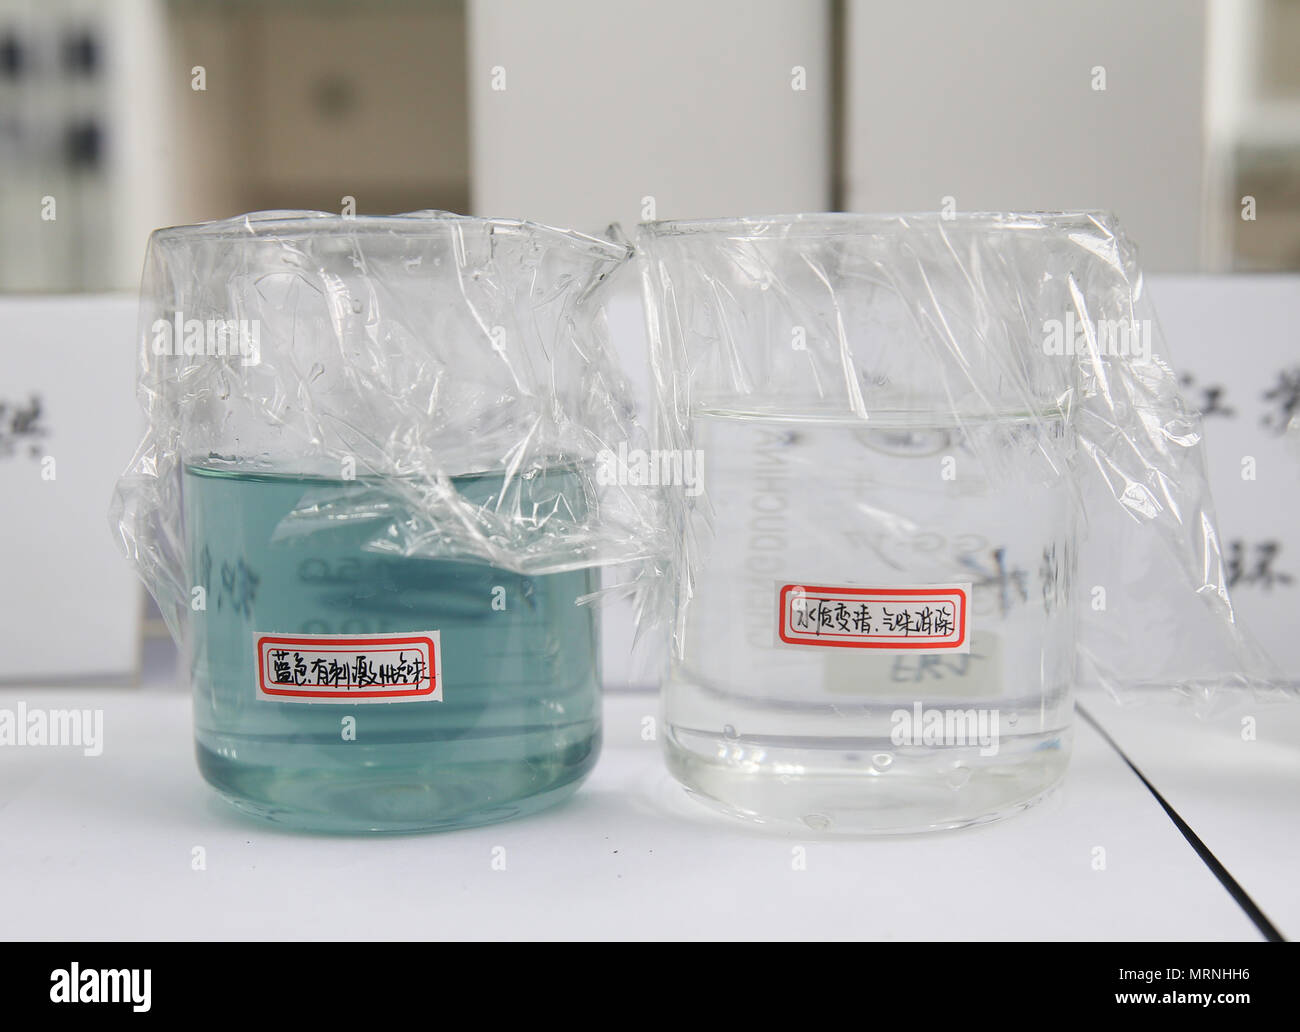 Shanghai. 24th Apr, 2018. Photo taken on April 24, 2018 shows contaminated water from textile and dyeing industry cleaned with the composite material within about three minutes at the Shanghai Institute of Ceramics of Chinese Academy of Sciences in east China's Shanghai. A new composite material developed by a group of Chinese researchers has proved highly effective in cleaning water contaminated by organics. Credit: Ding Ting/Xinhua/Alamy Live News Stock Photo